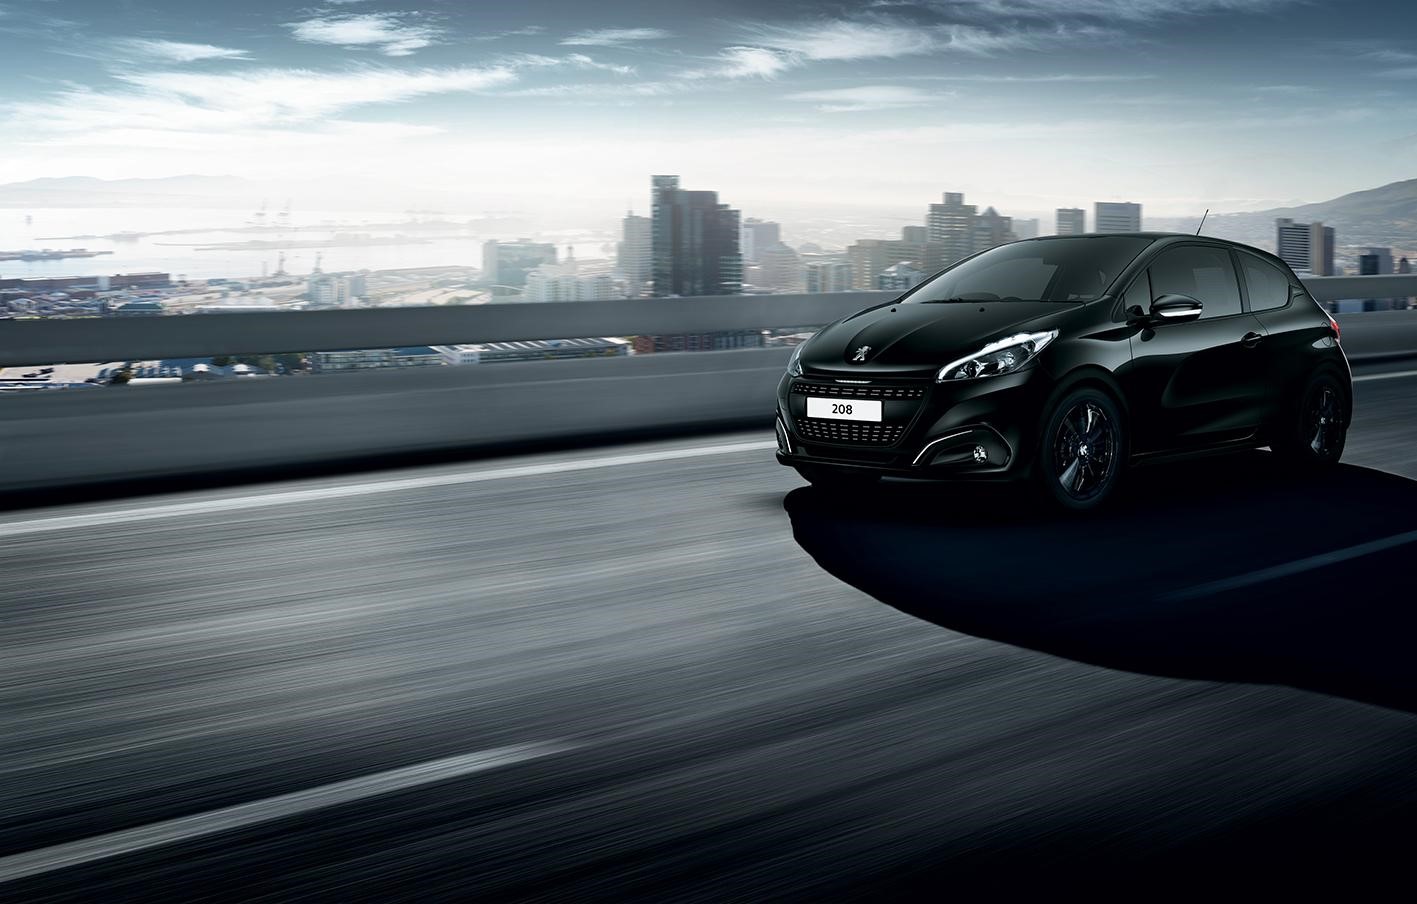 5 Facts You Need To Know About The Peugeot 208 Black Edition